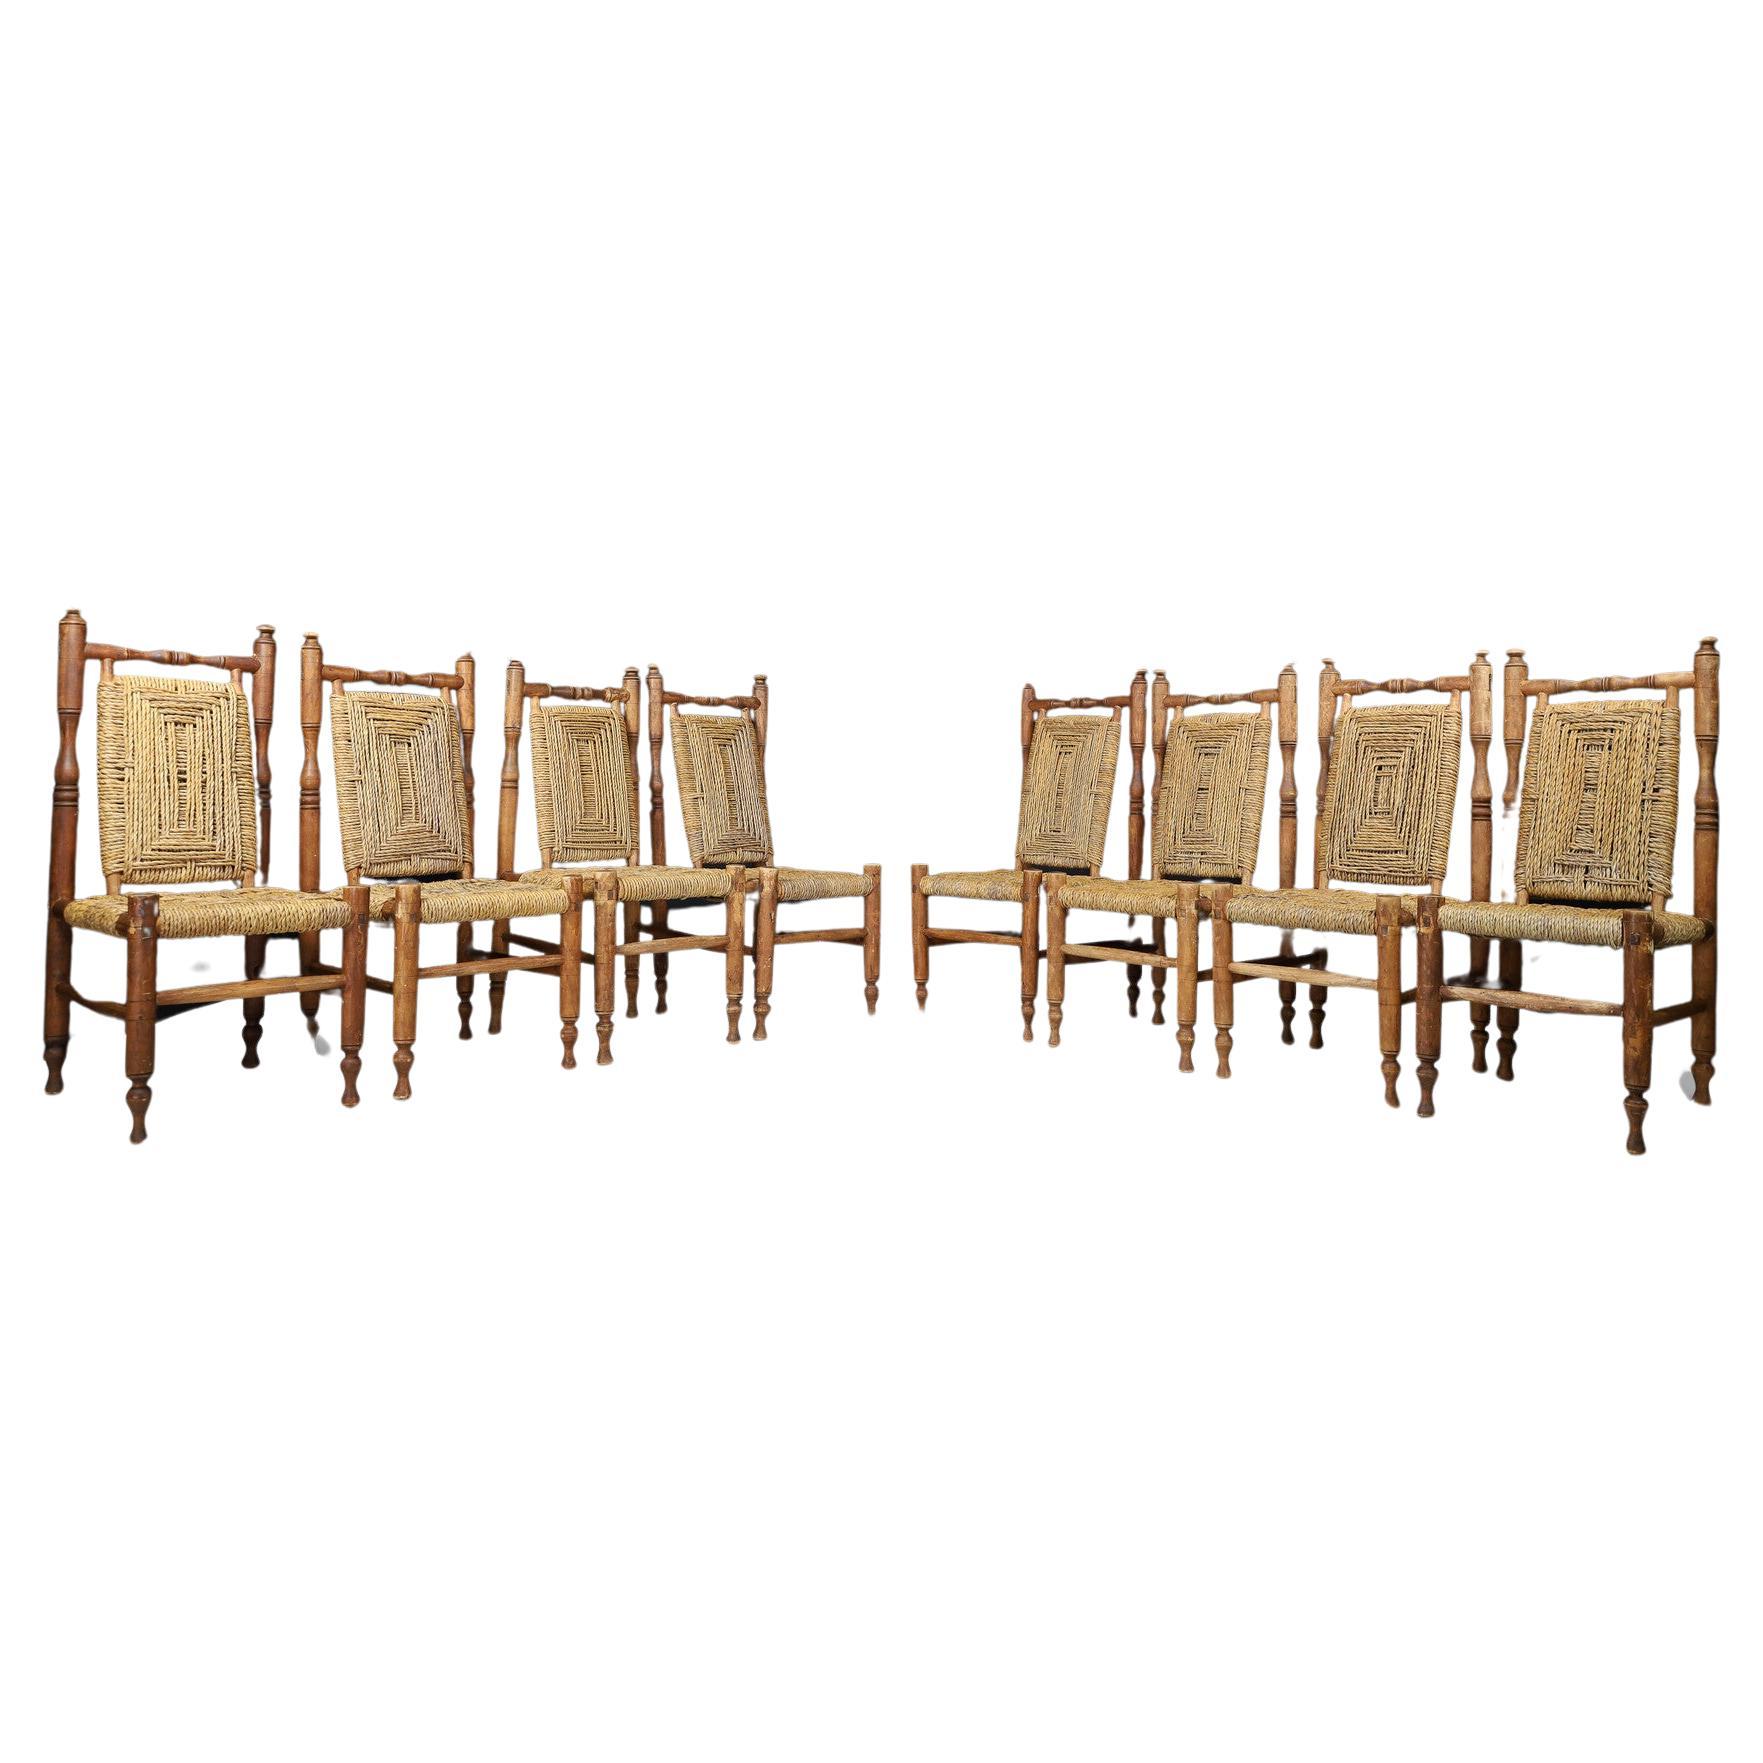 Adrien Audoux and Frida Minet, Set of 8 Mid Century Dining Chairs, circa 1950s